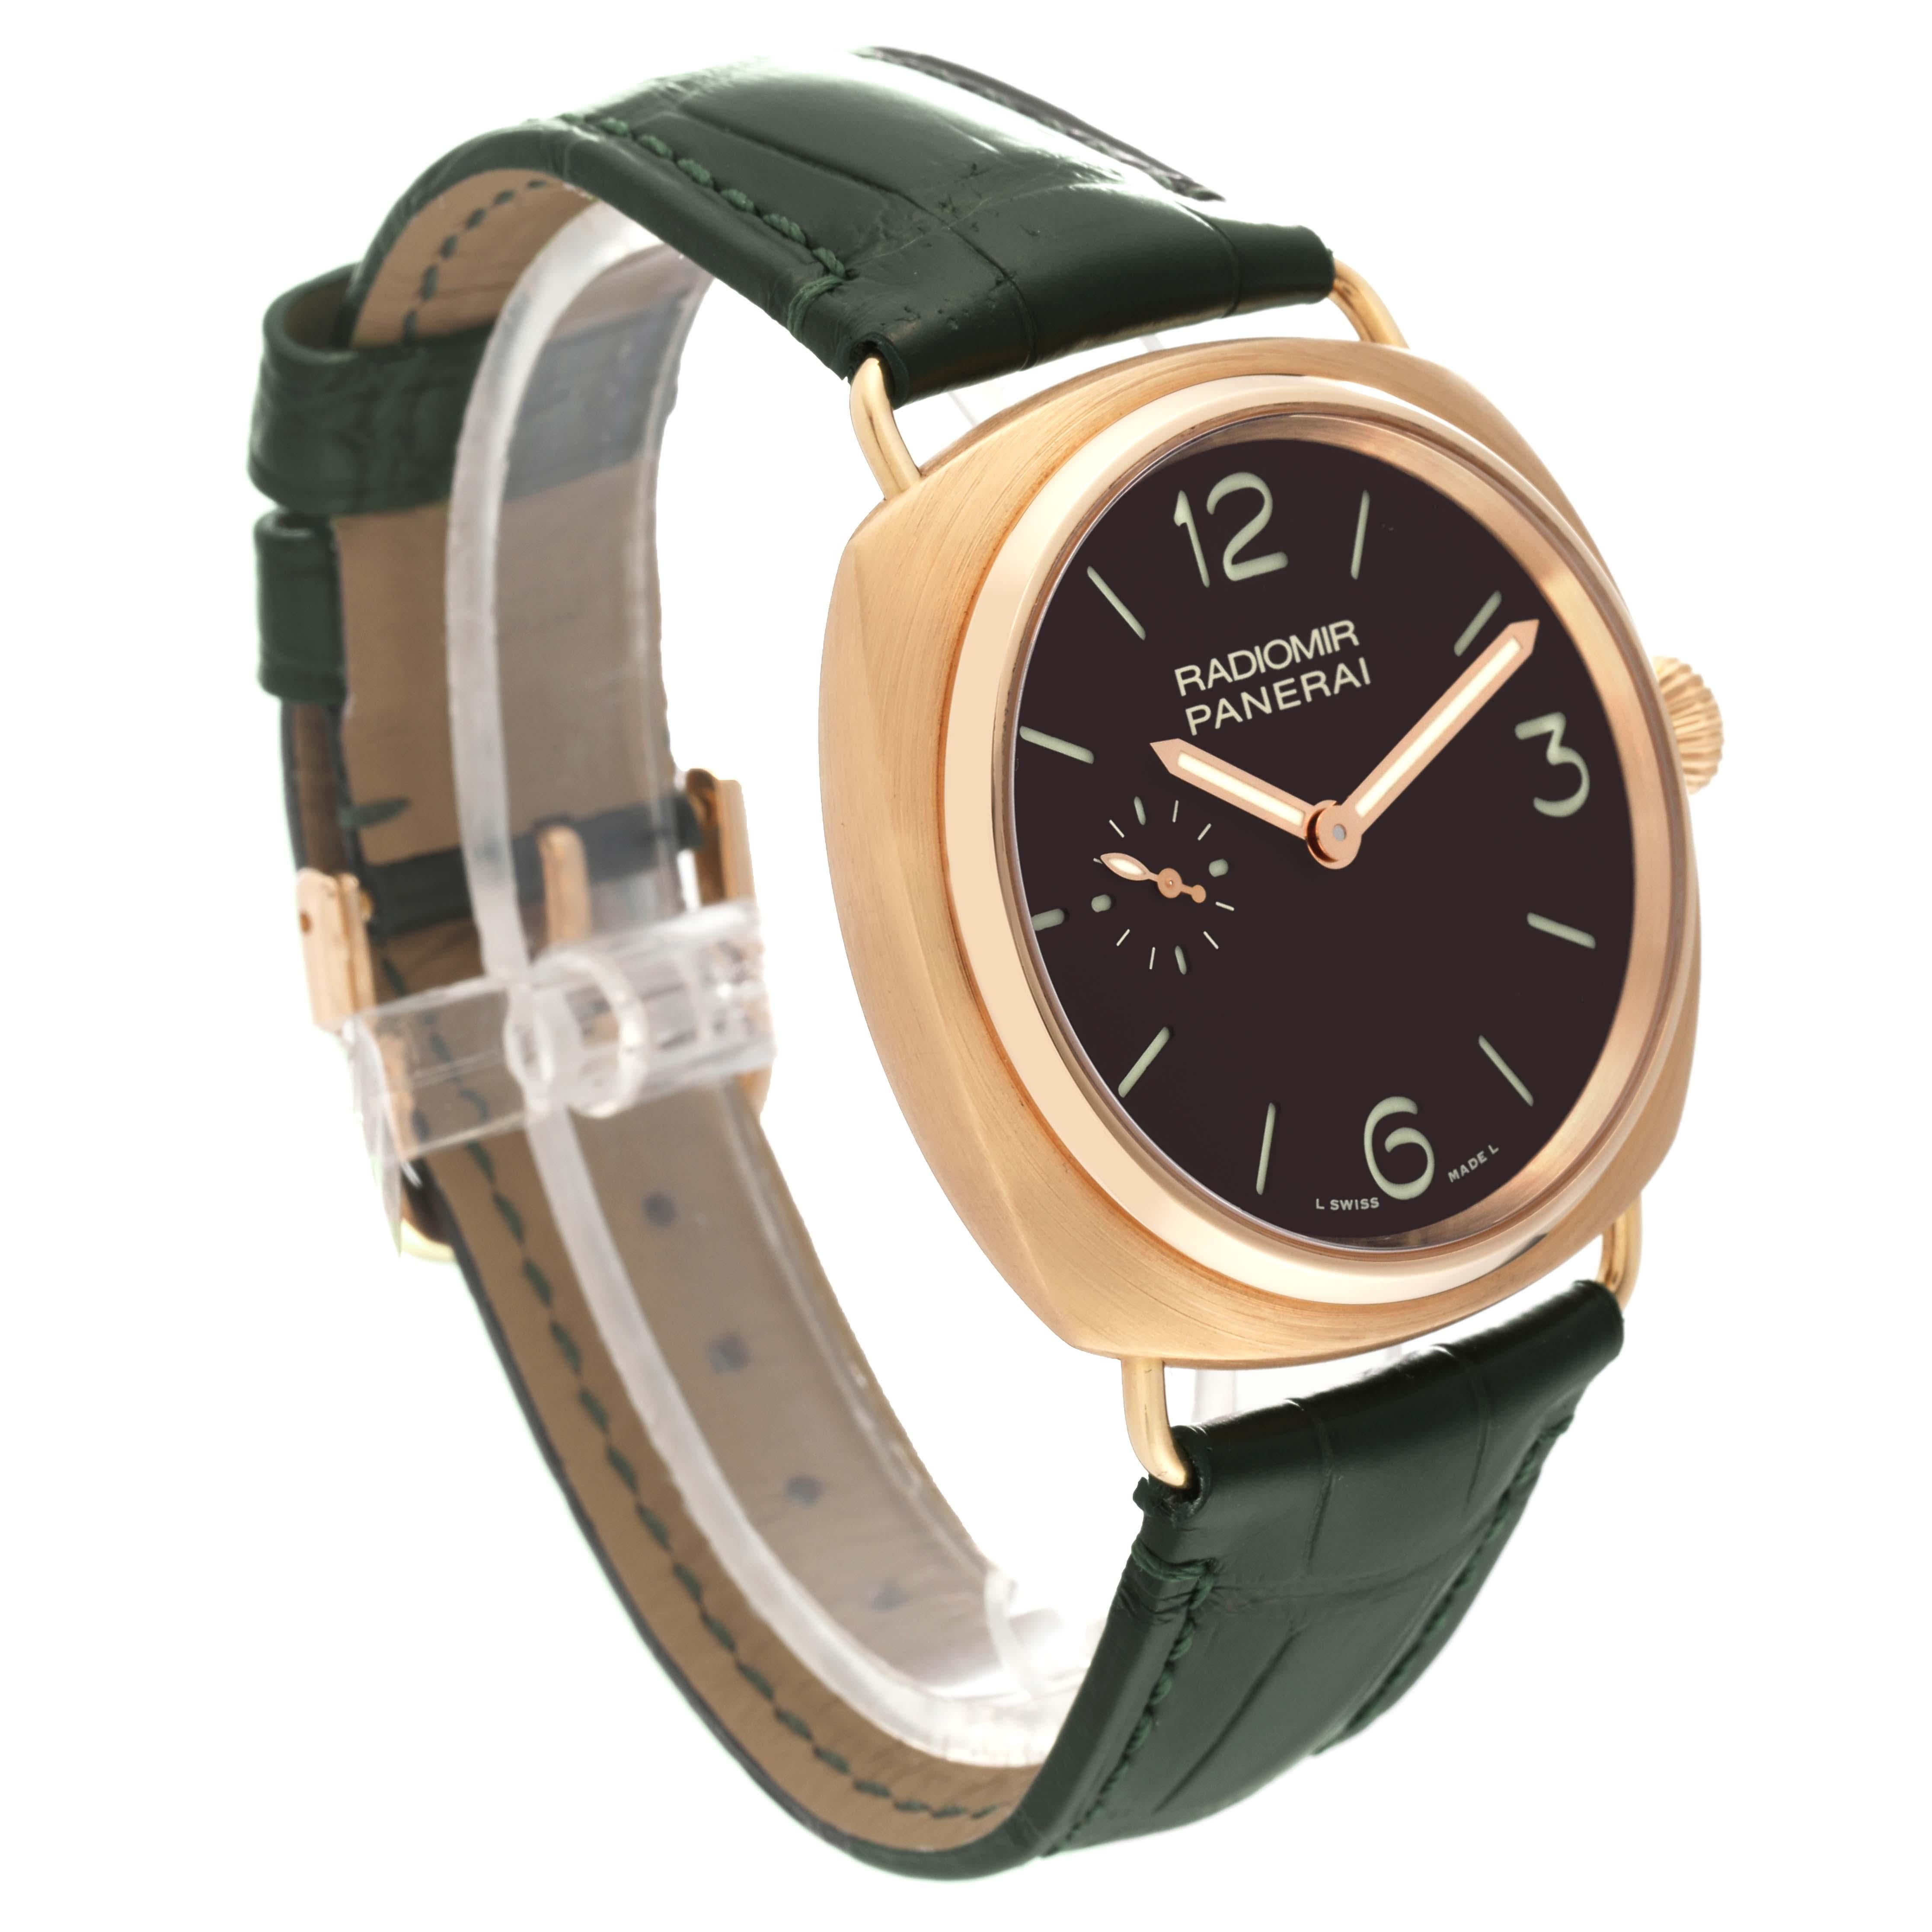 Panerai Radiomir Limited Edition Rose Gold Mens Watch PAM00336 Box Papers. Manual winding movement. 18k Rose gold cushion shaped case 42.0 mm in diameter. Transparent exhibition sapphire crystal caseback. 18k rose gold sloped bezel. Scratch